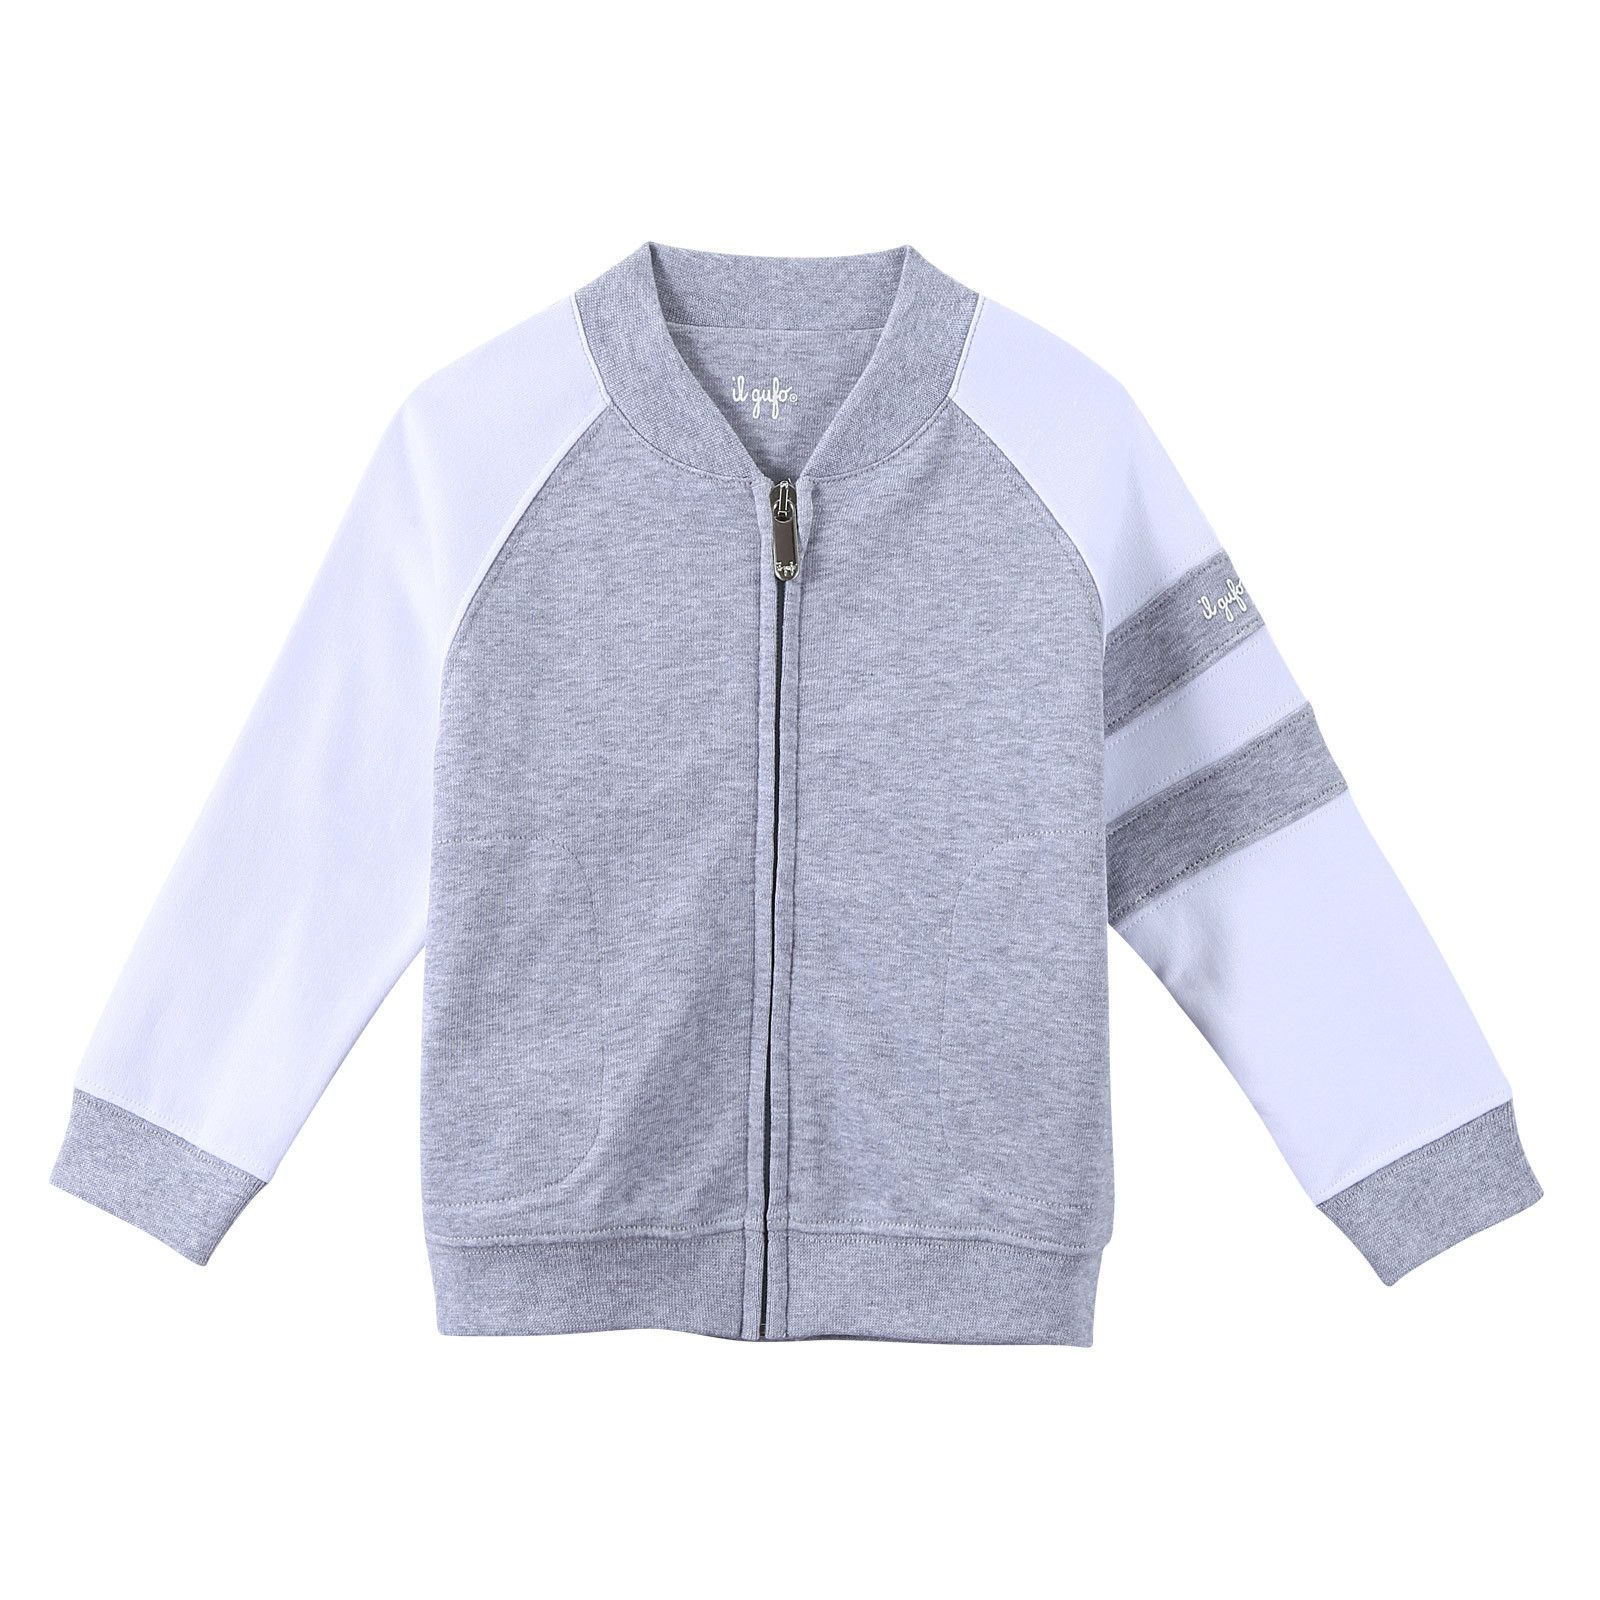 Boys Grey Cotton Knitted Jacket With Stripe Trims - CÉMAROSE | Children's Fashion Store - 1